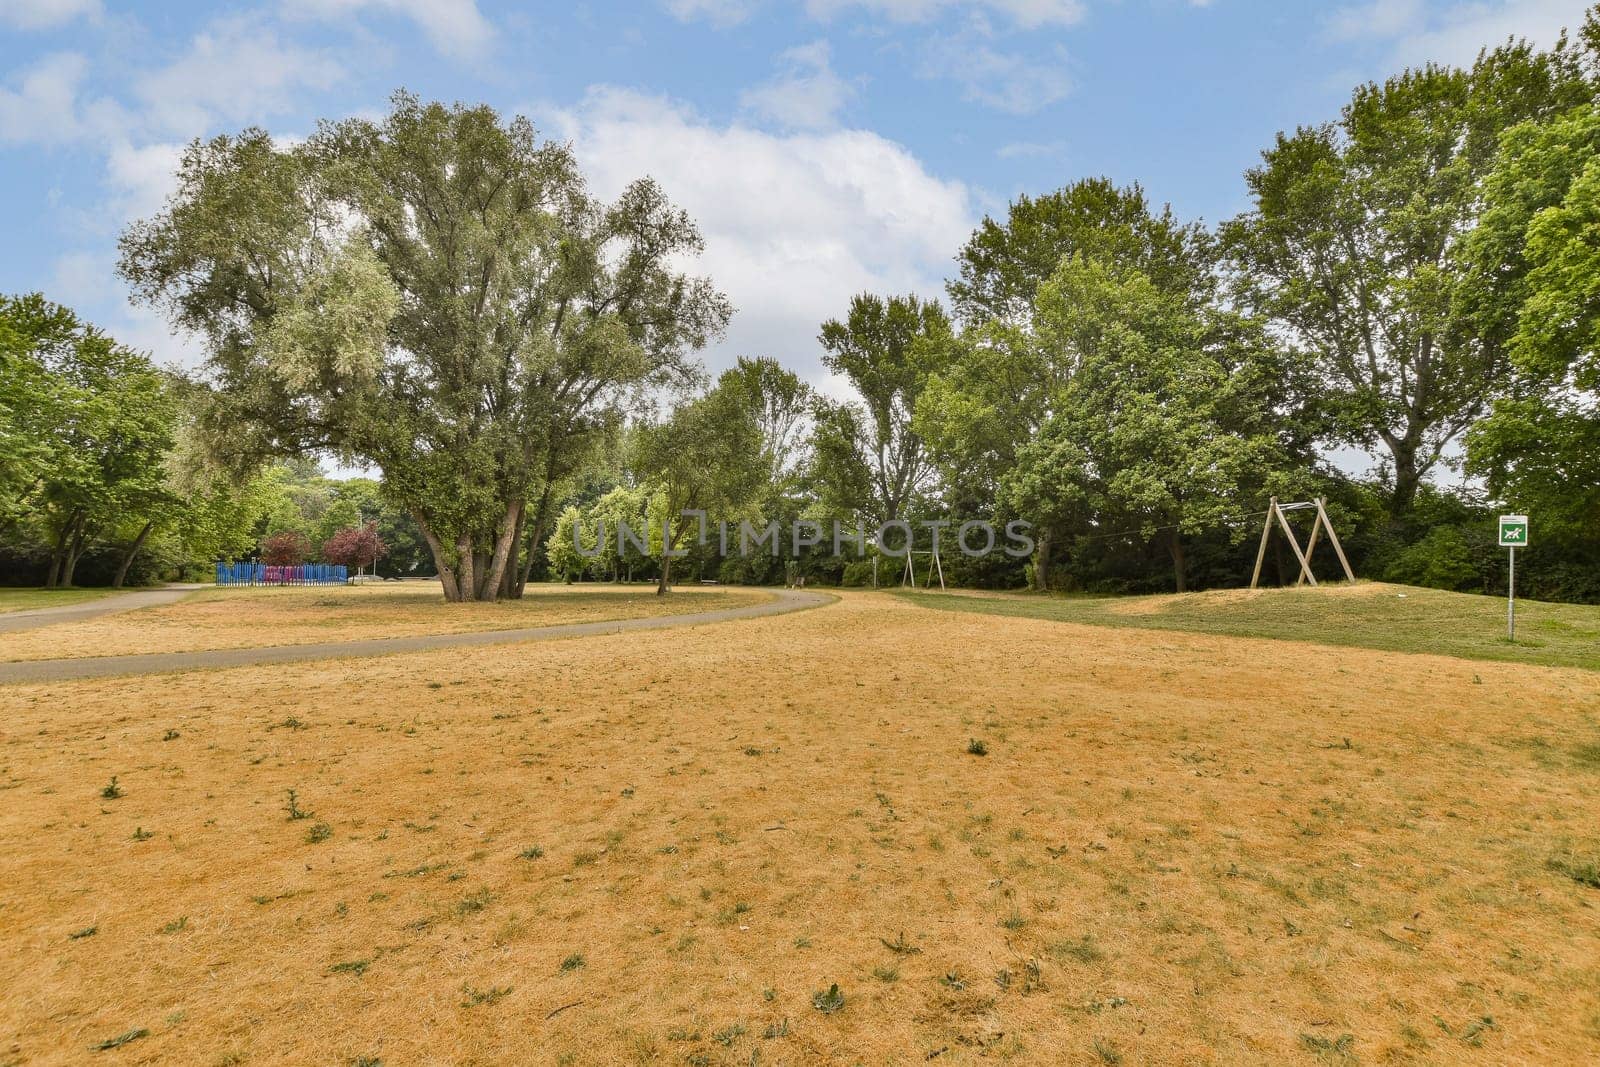 a large field with trees and a playground in the by casamedia